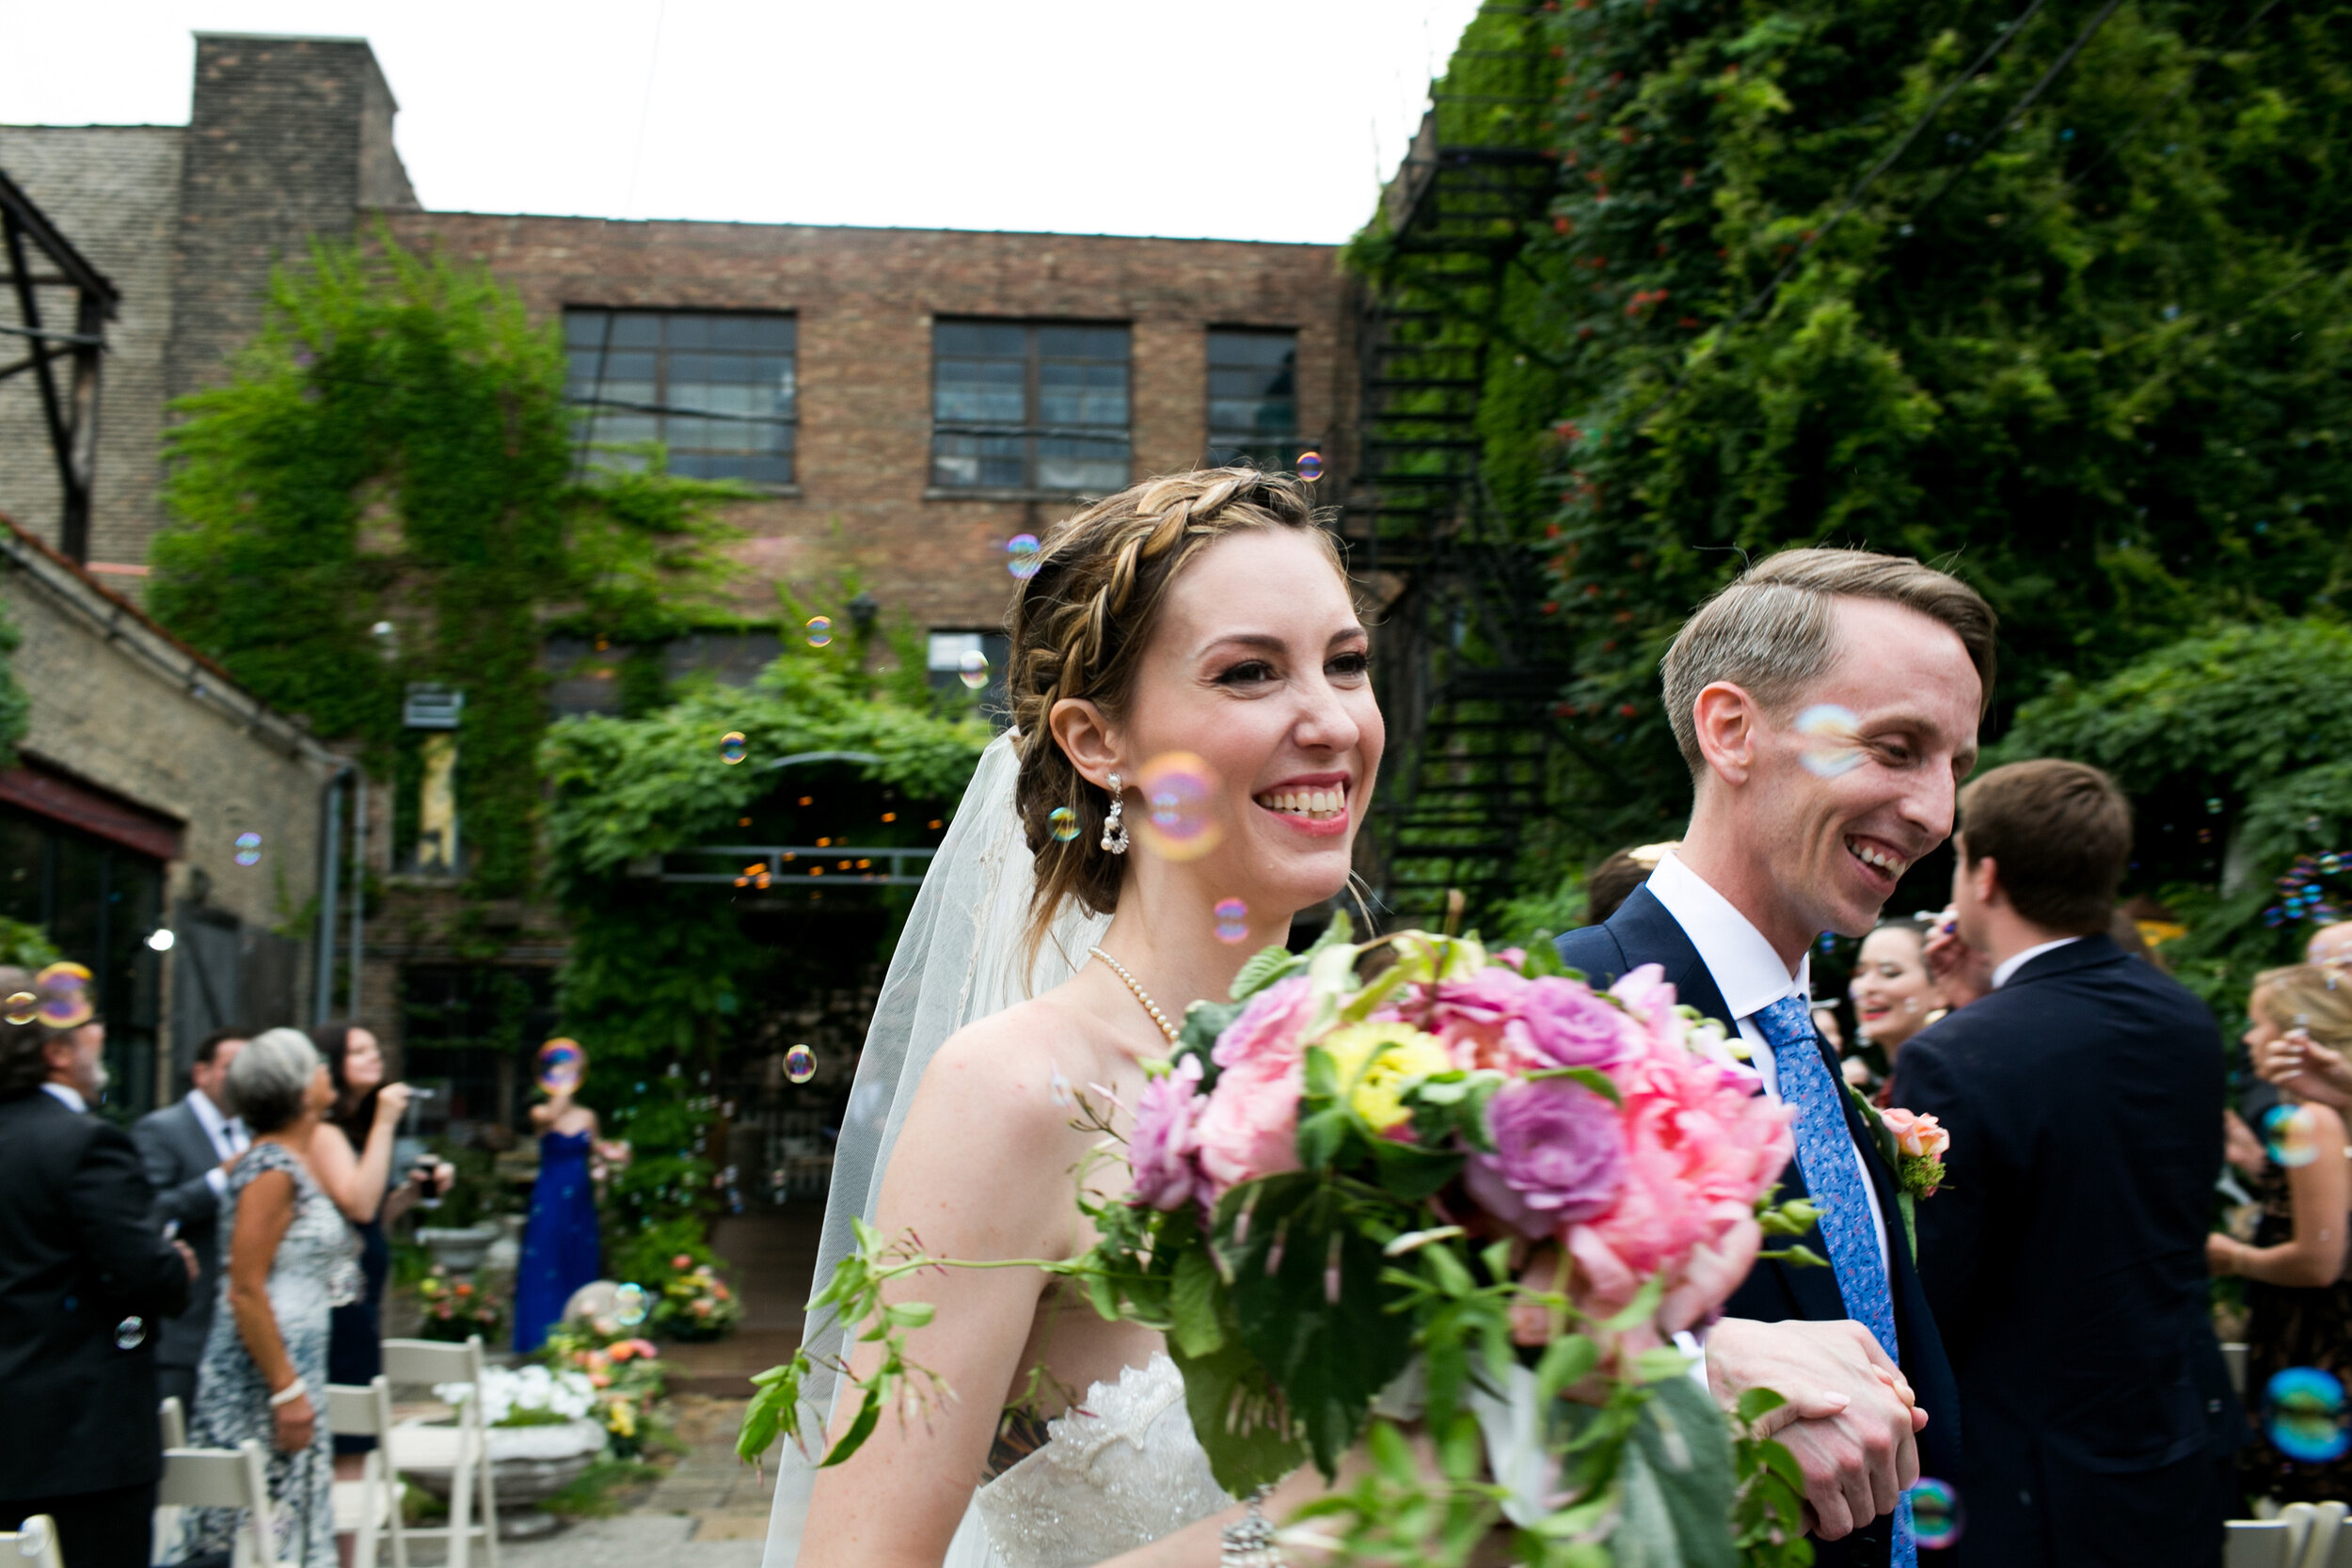 Vintage Romantic Wedding at Salvage One captured by Heather DeCamp Photography featured on CHI thee WED.